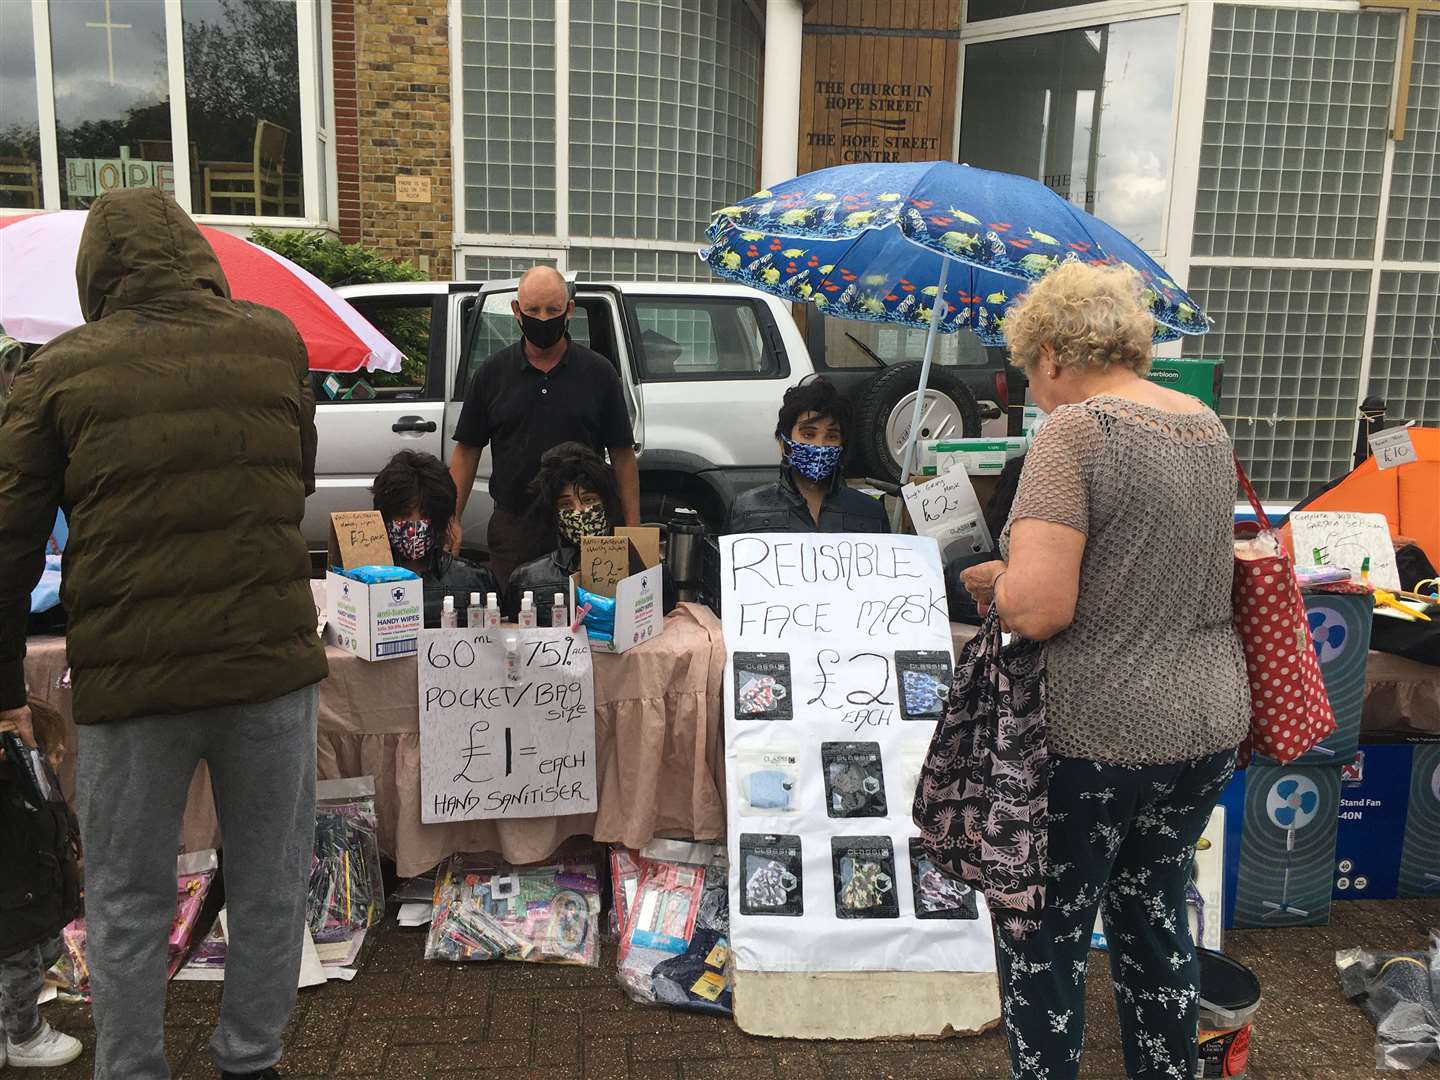 A market trader in Sheerness has plenty of face masks for sale